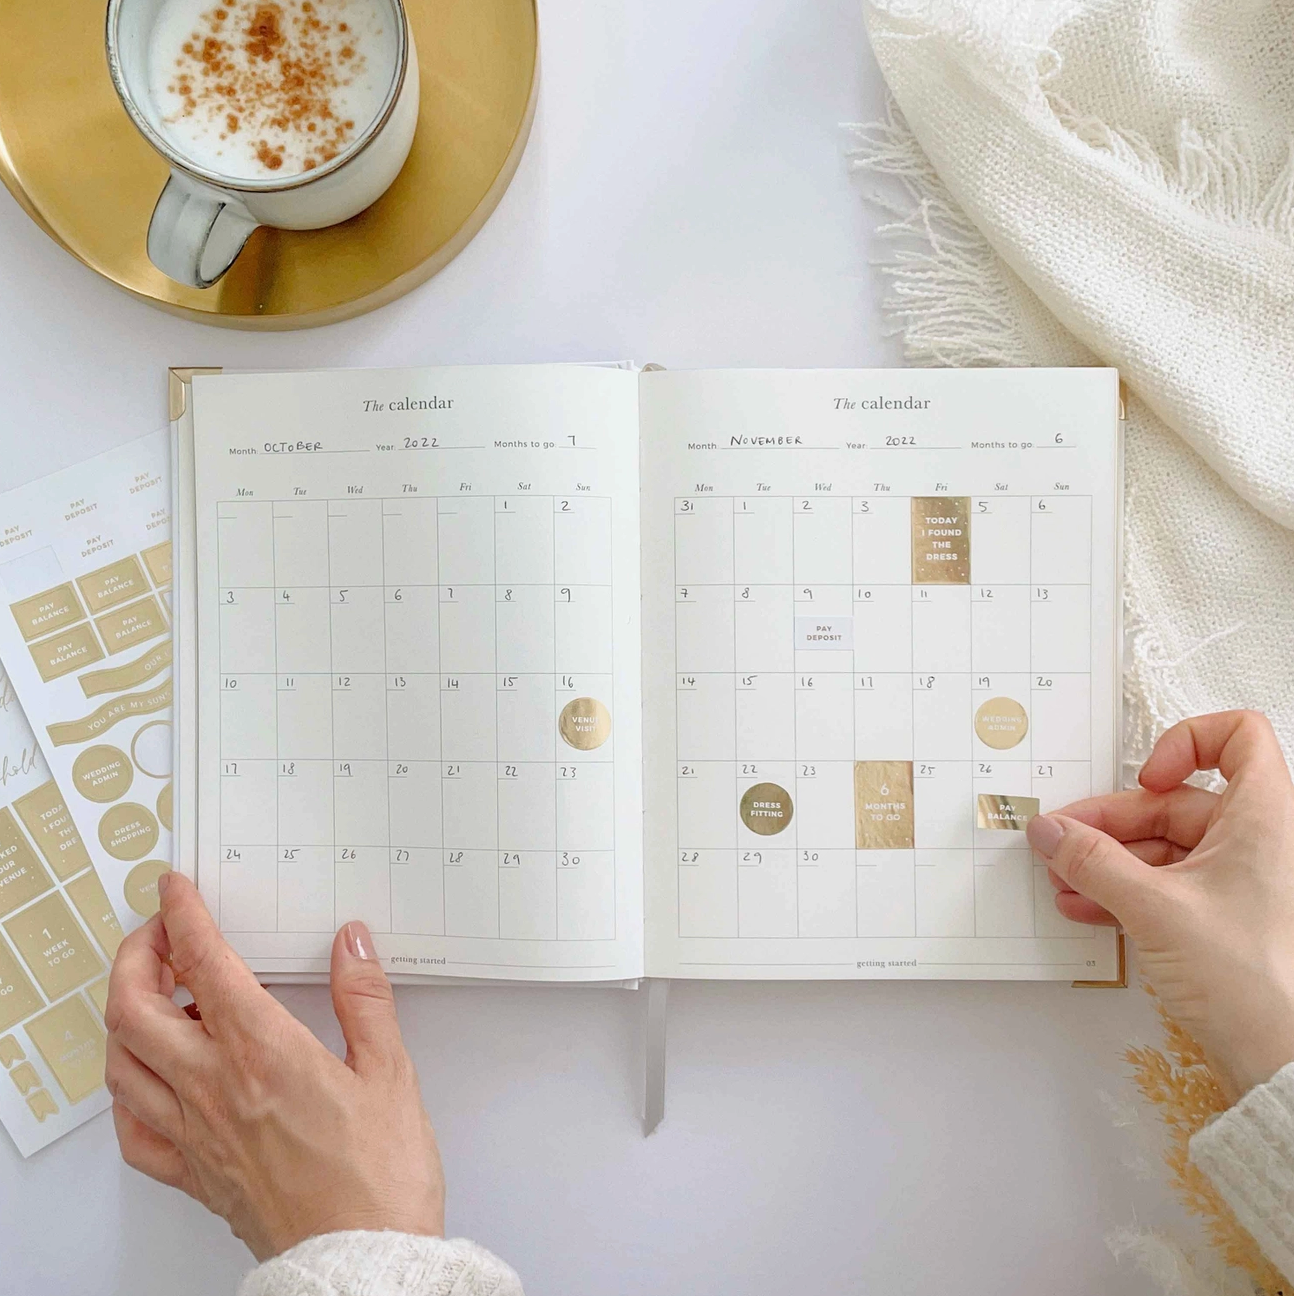 Plan your perfect day with this opulent gold-edged wedding book.